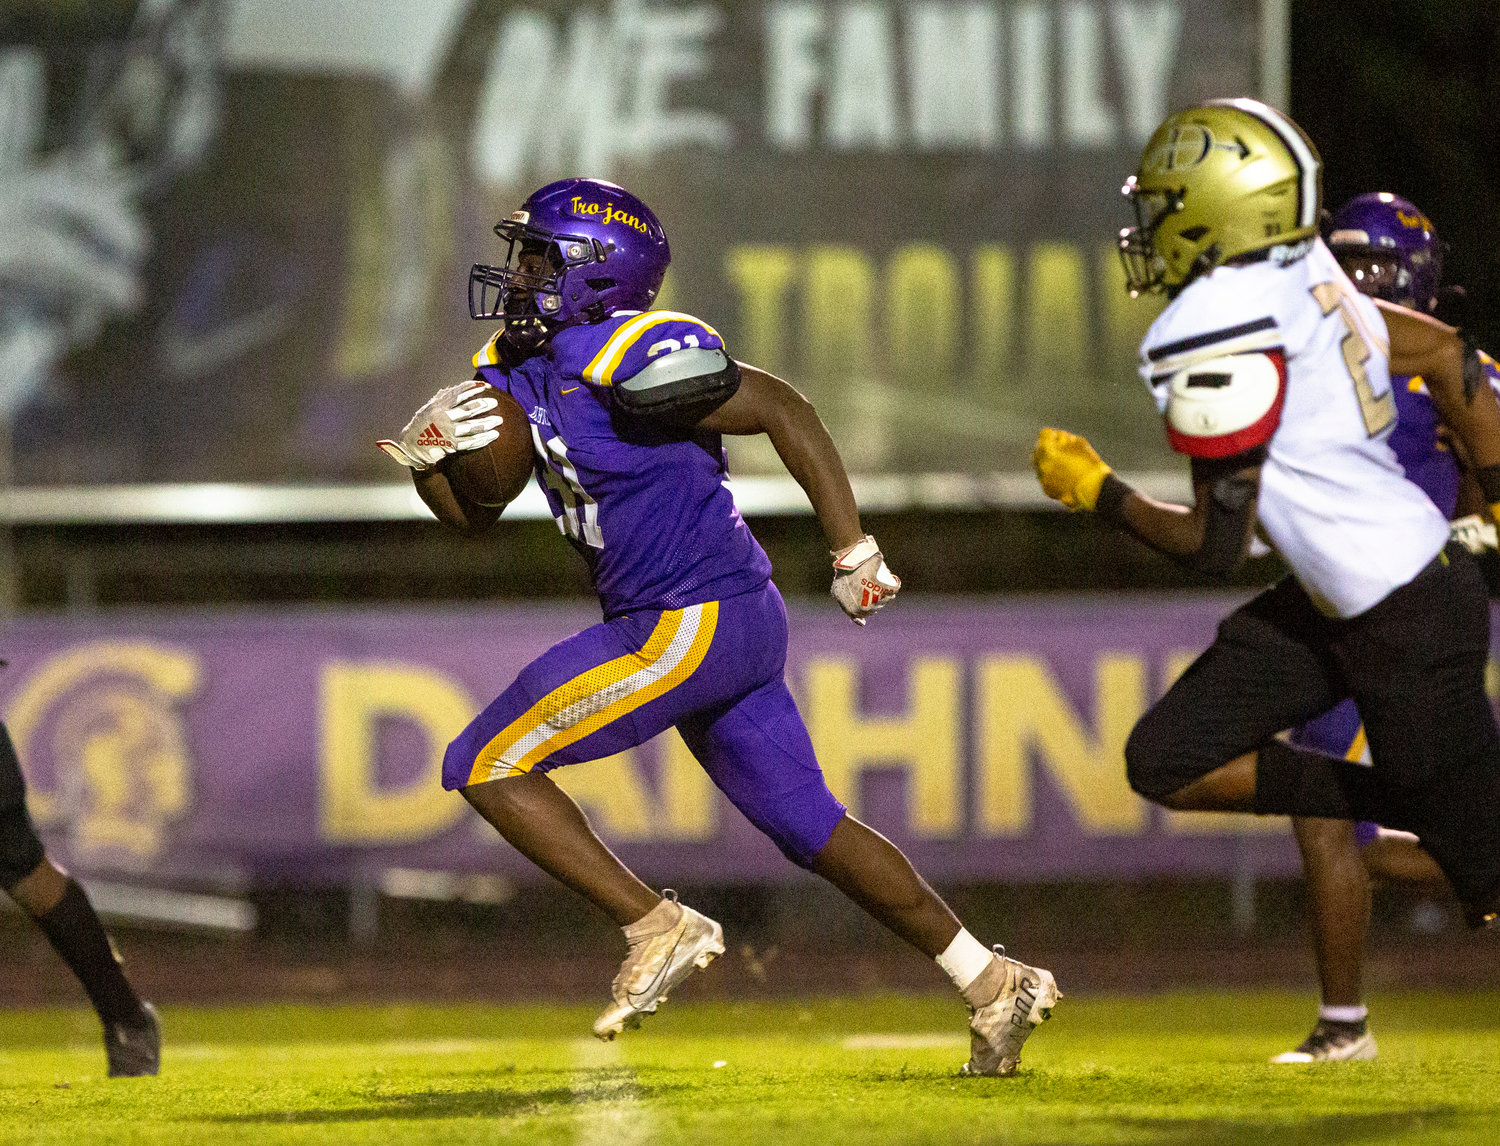 Trojan senior Michael Scott eyes the end zone on his second-half rushing touchdown that helped Daphne down Davidson 40-21 in region play Friday night at Jubilee Stadium.